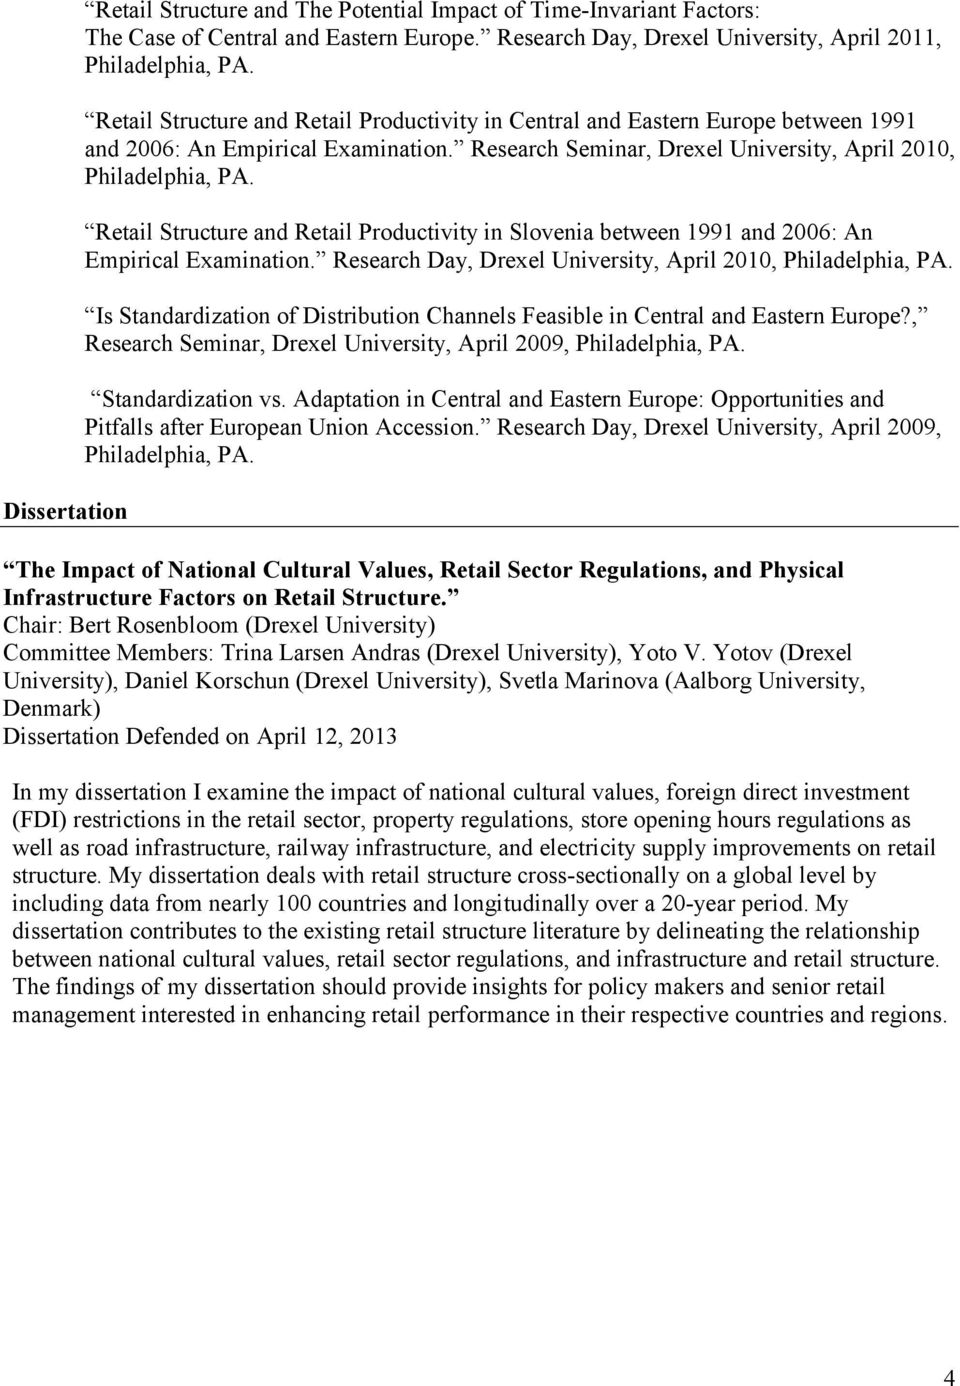 Retail Structure and Retail Productivity in Slovenia between 1991 and 2006: An Empirical Examination. Research Day, Drexel University, April 2010, Philadelphia, PA.